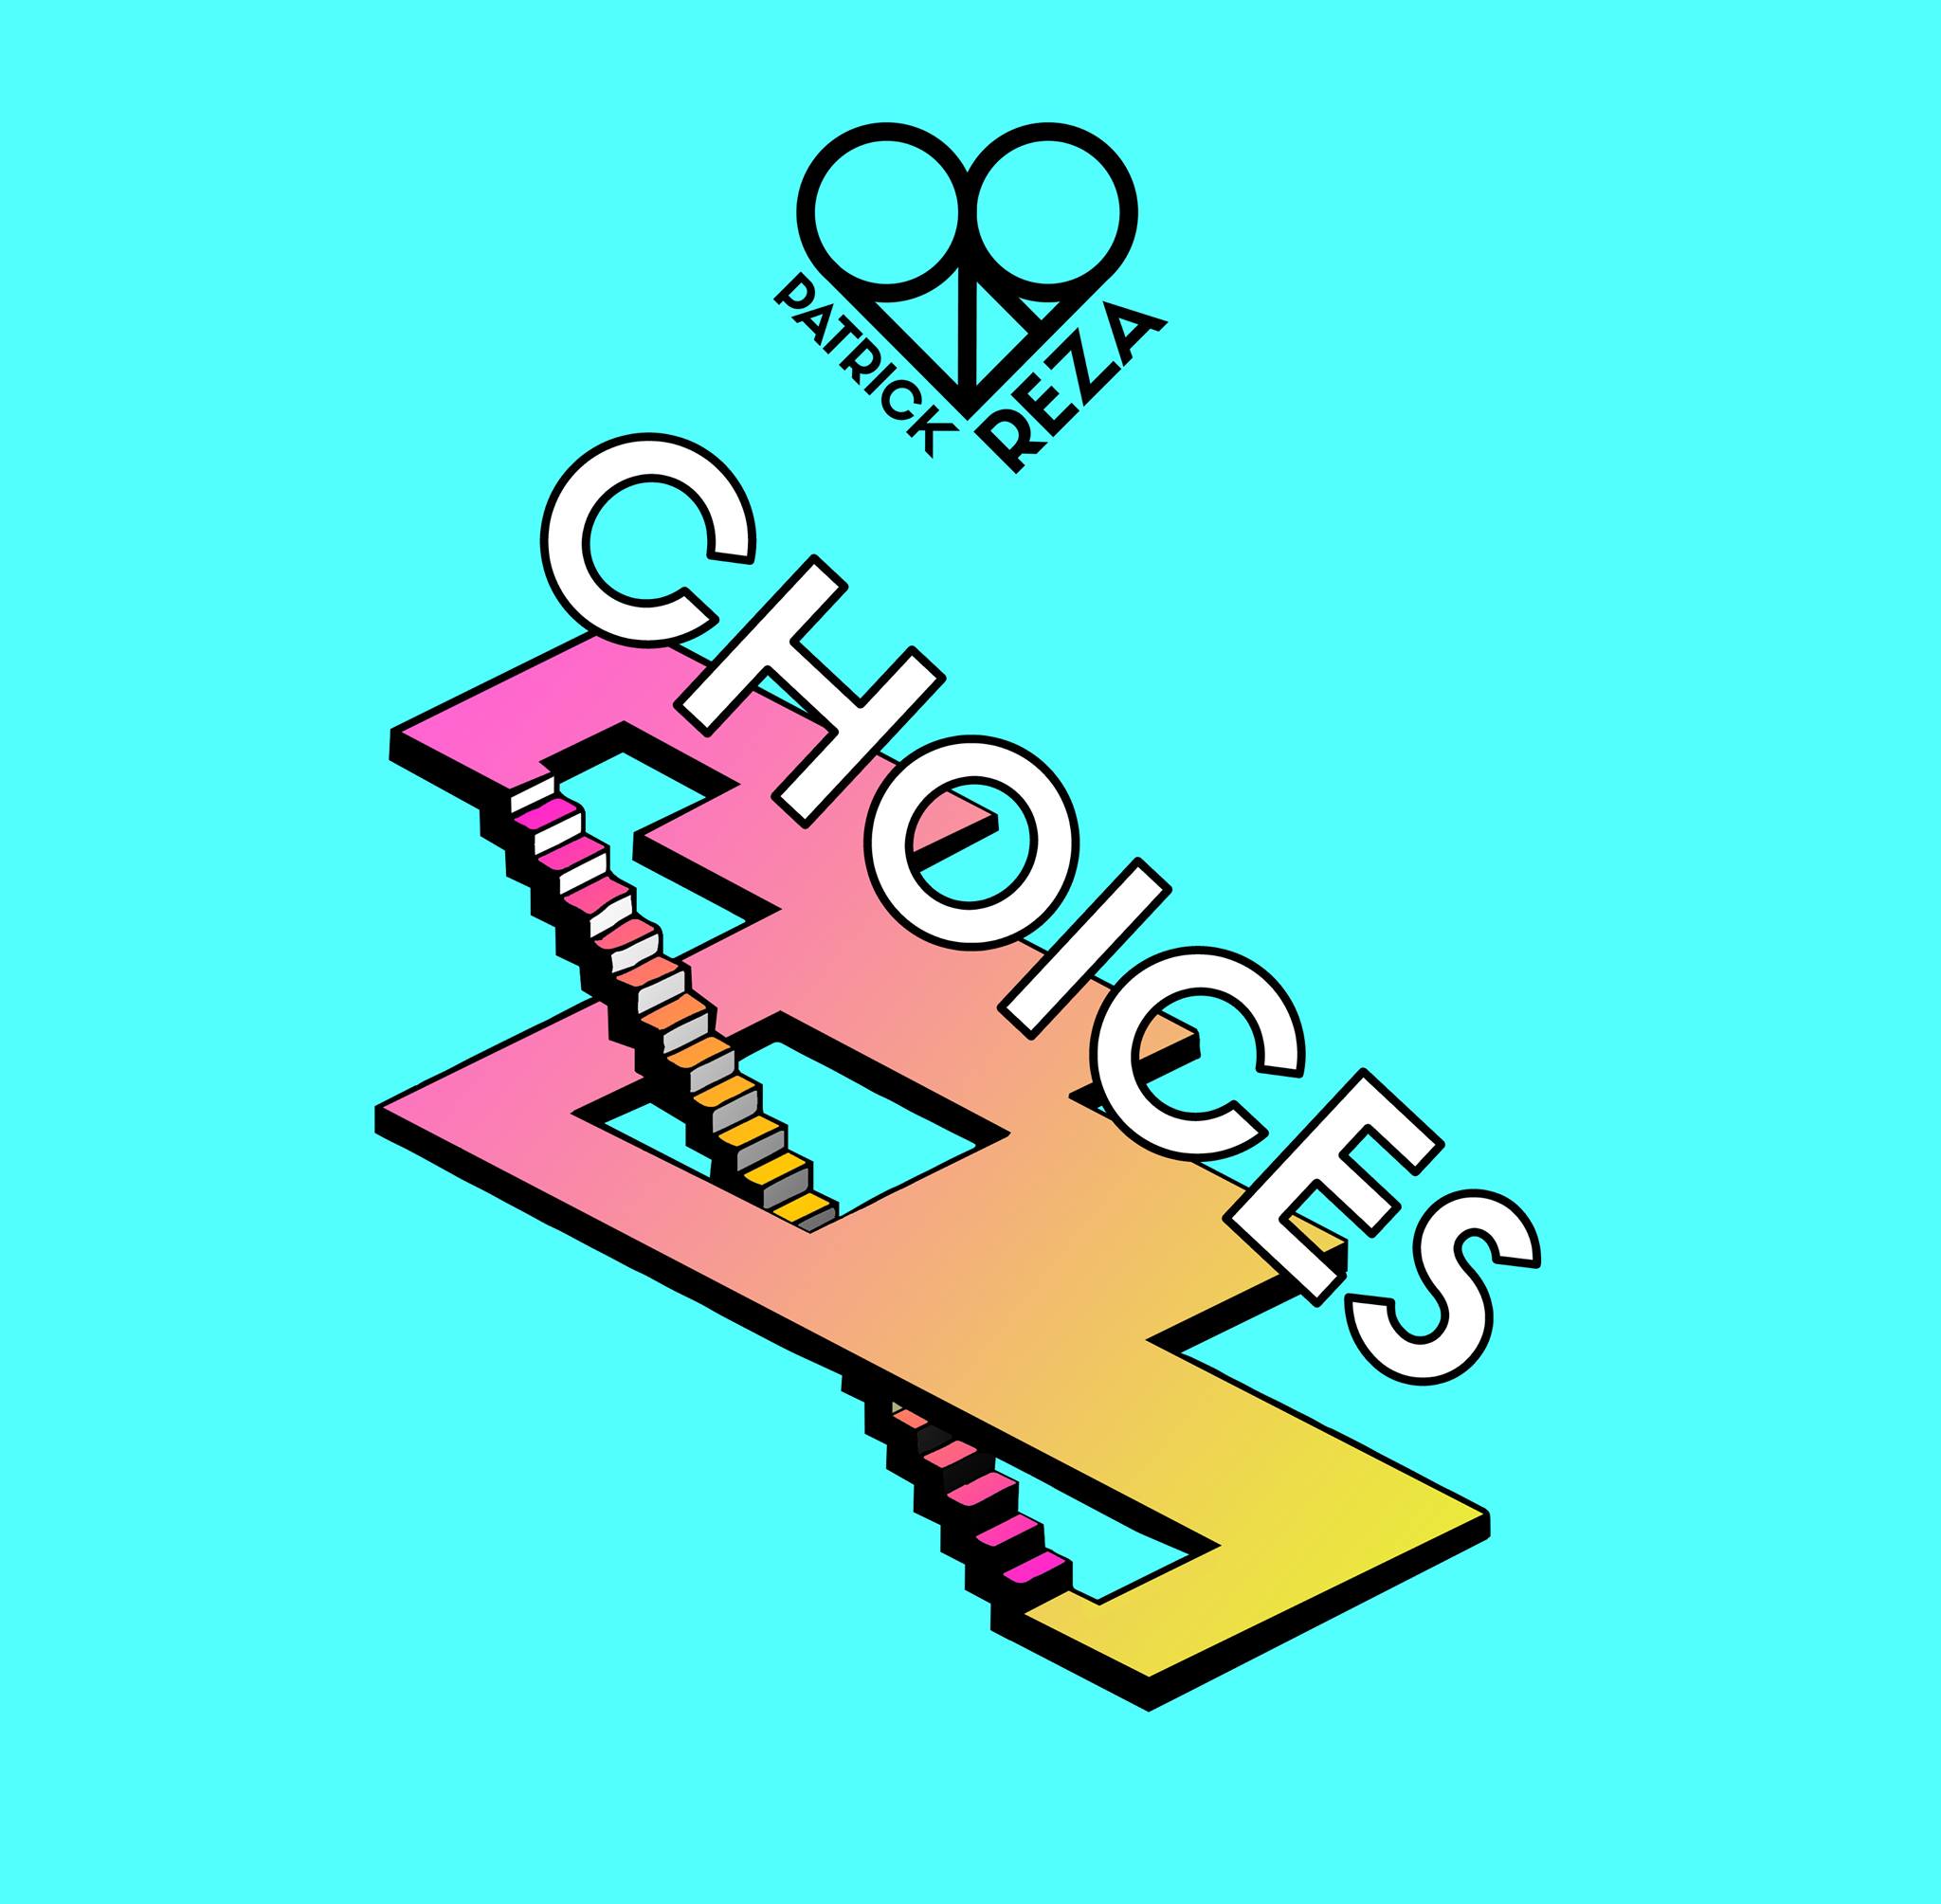 PatrickReza’s “Choices” Showcases New Experimental Side For The Cali-Based Artist